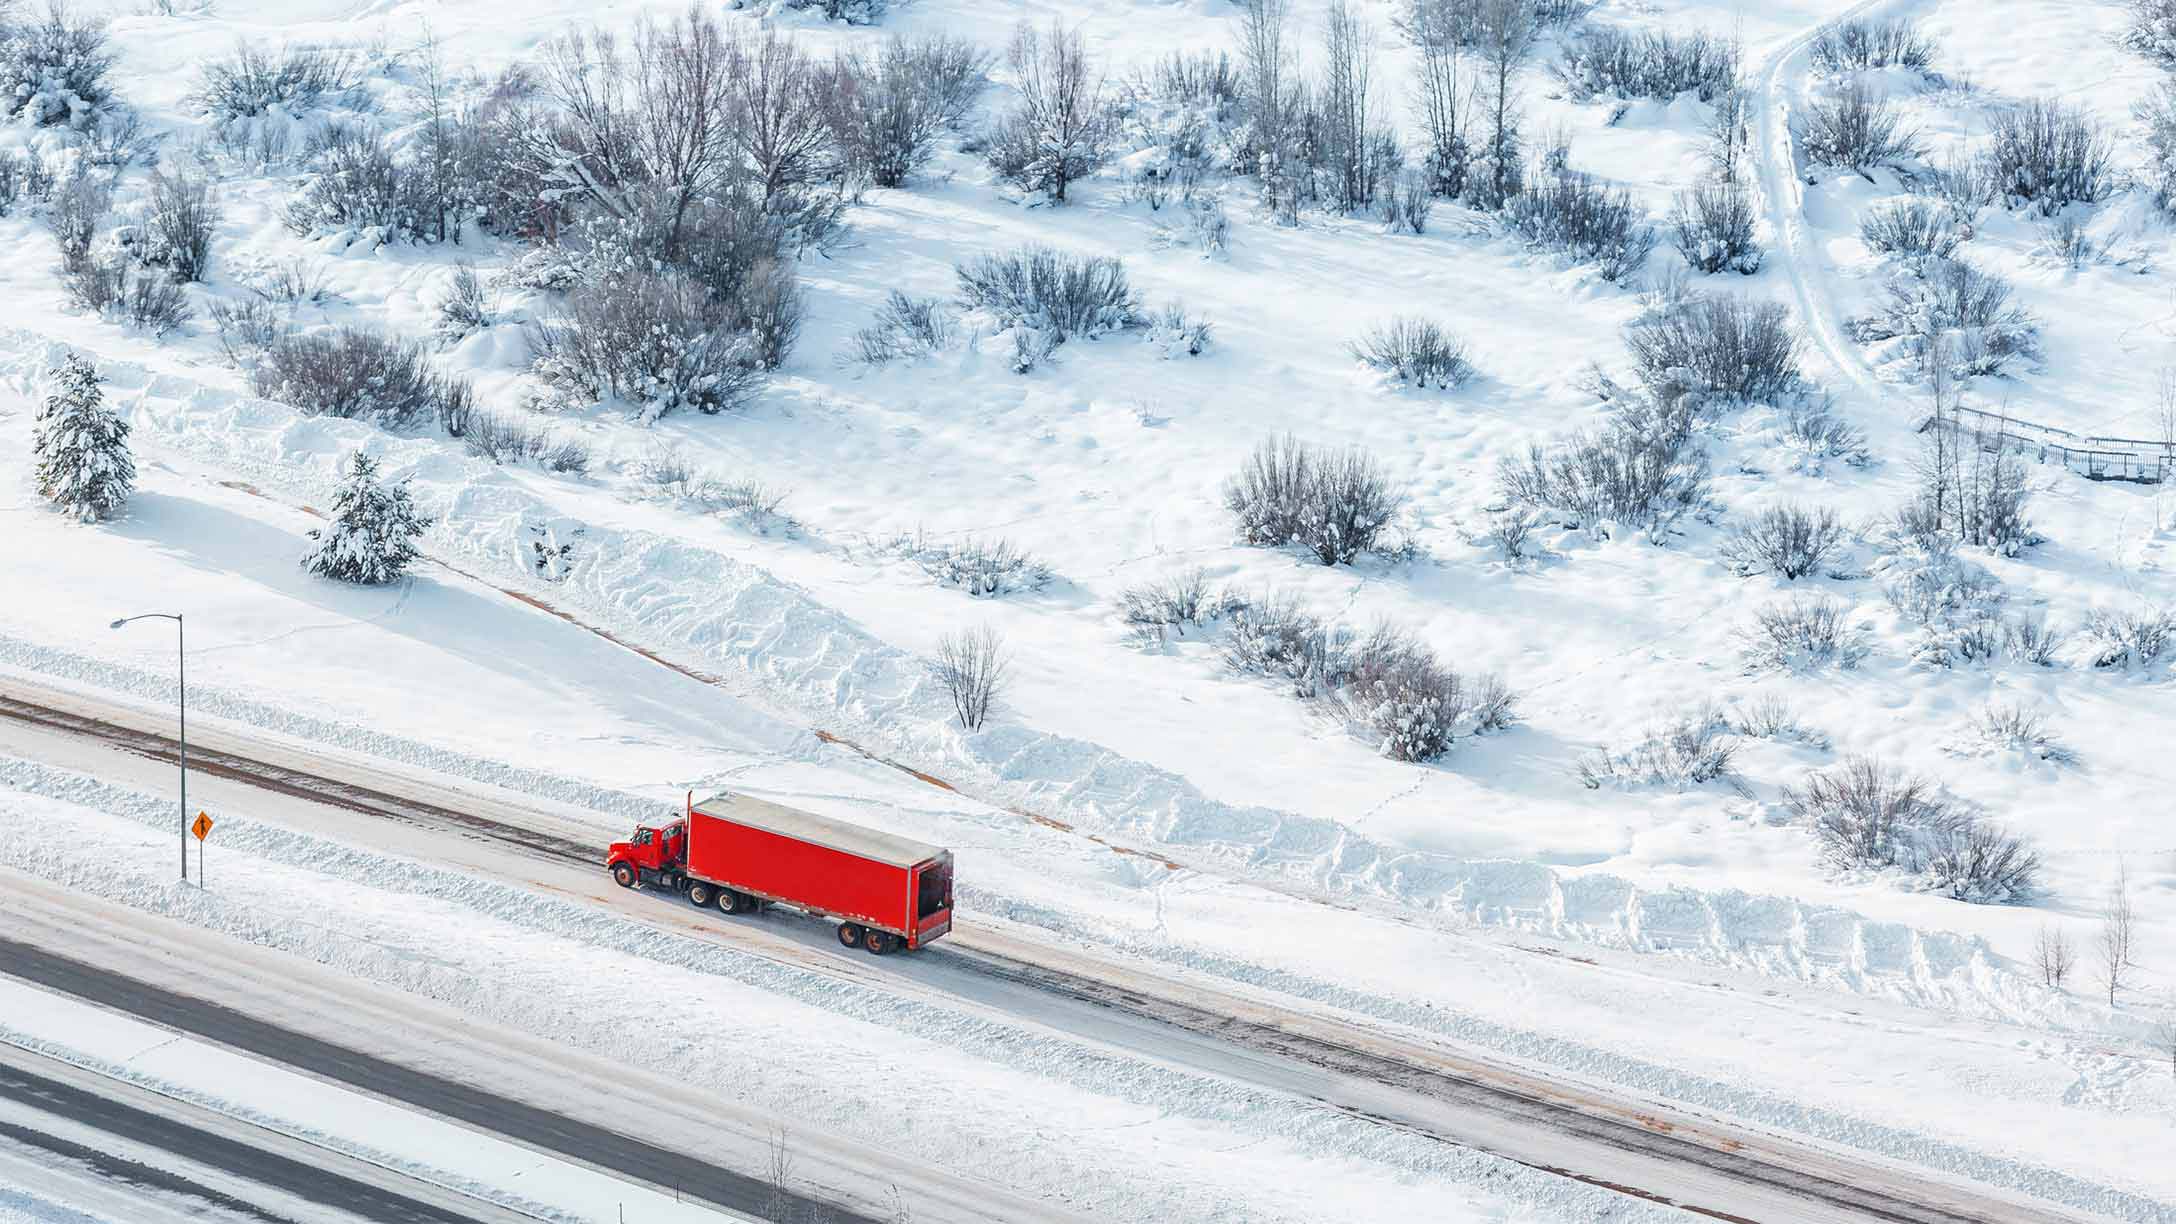 Transport truck driving on road surrounded by trees covered in snow